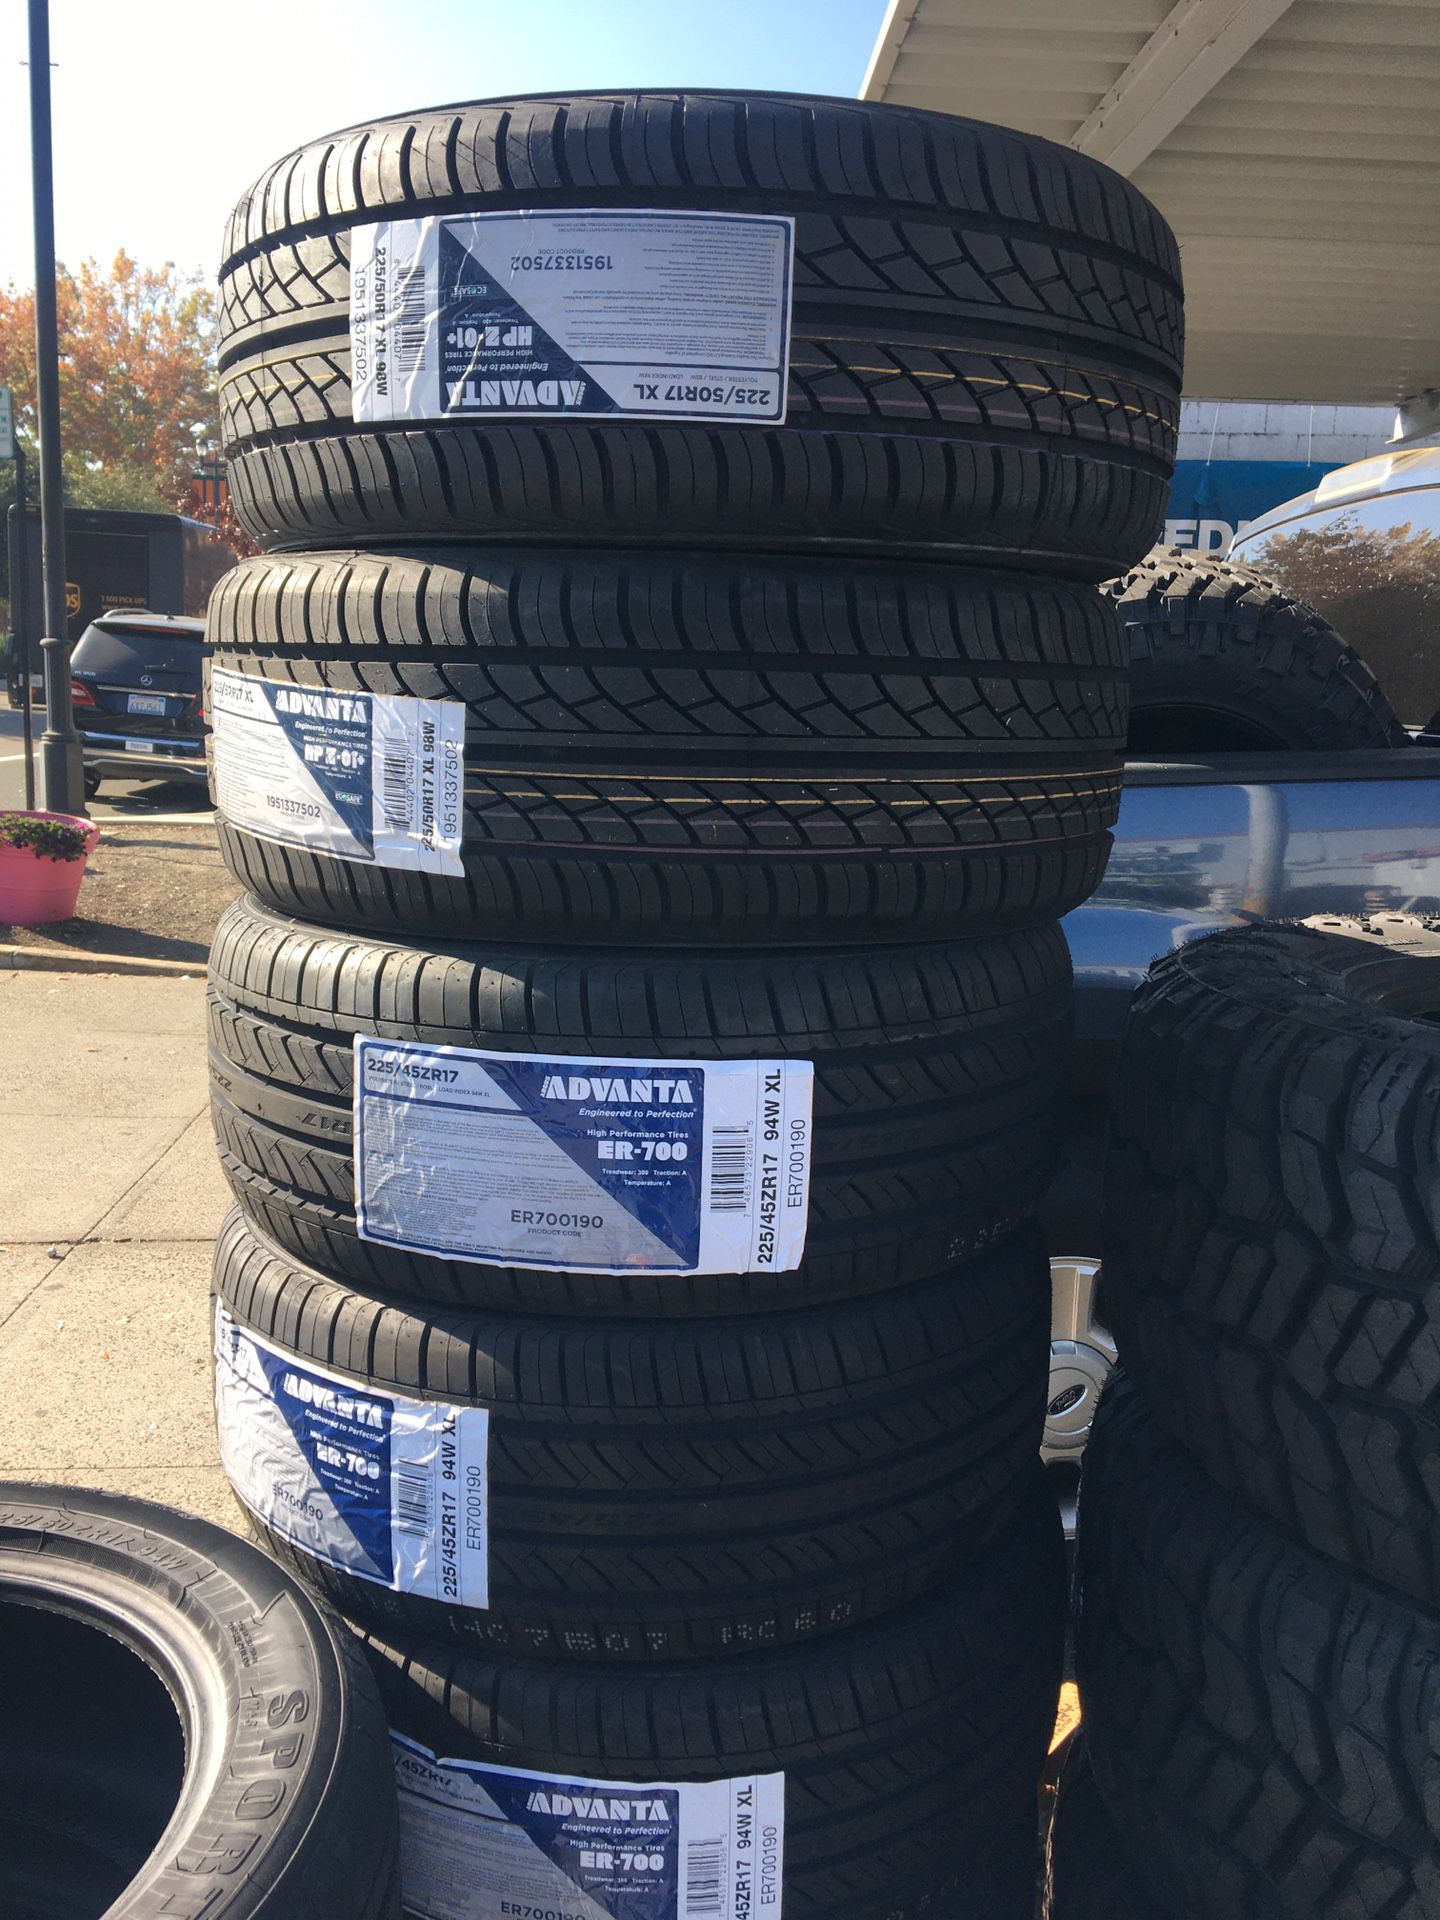 225/45R17 - $299.00 All 4 Installed w/ free alignment